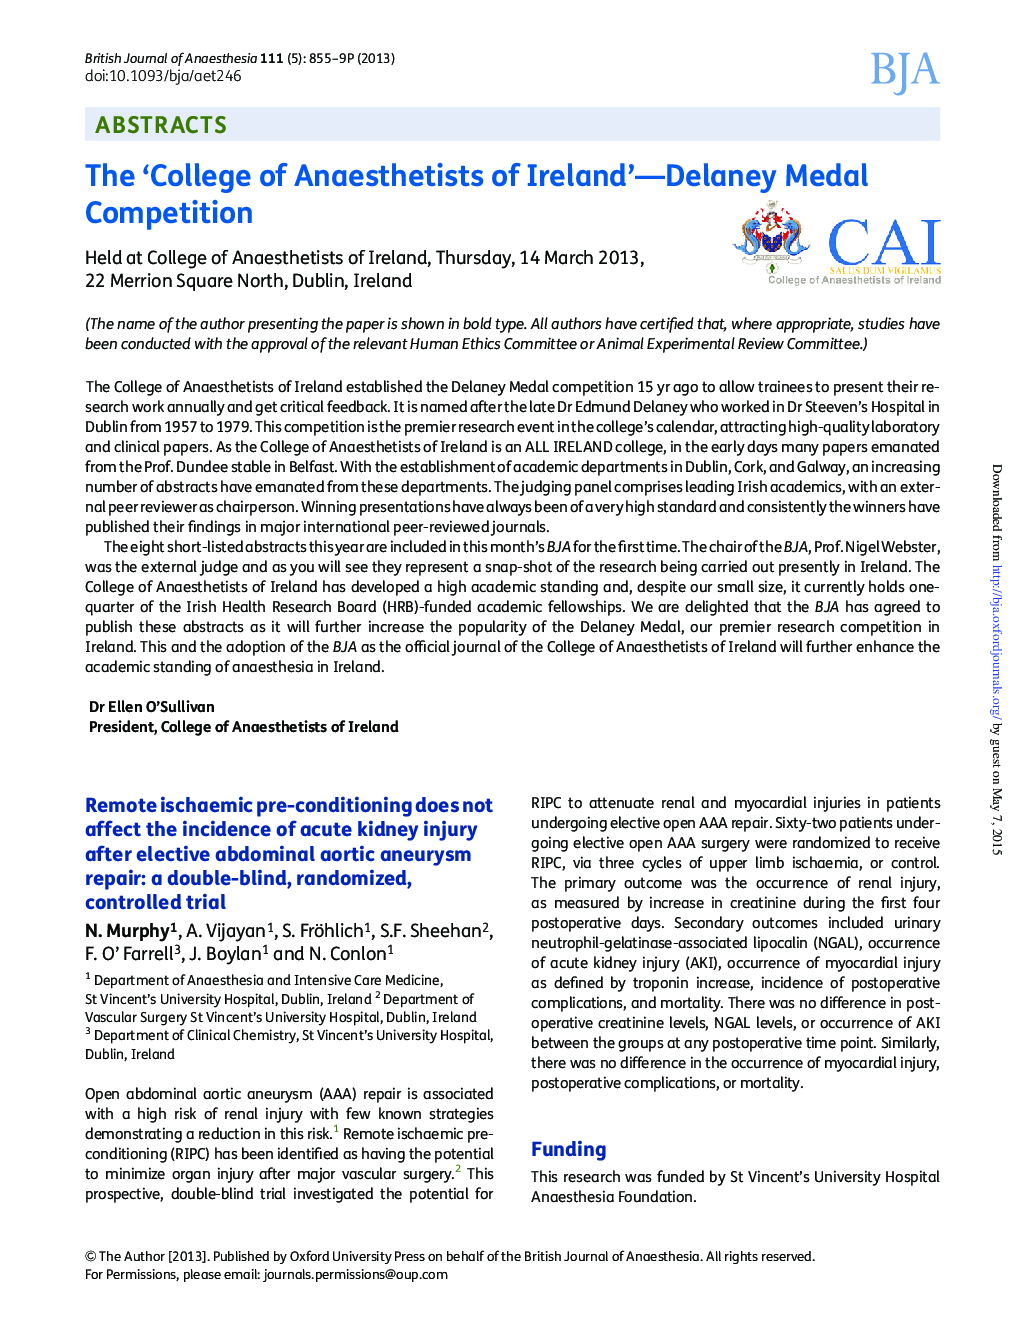 The 'College of Anaesthetists of Ireland'-Delaney Medal Competition